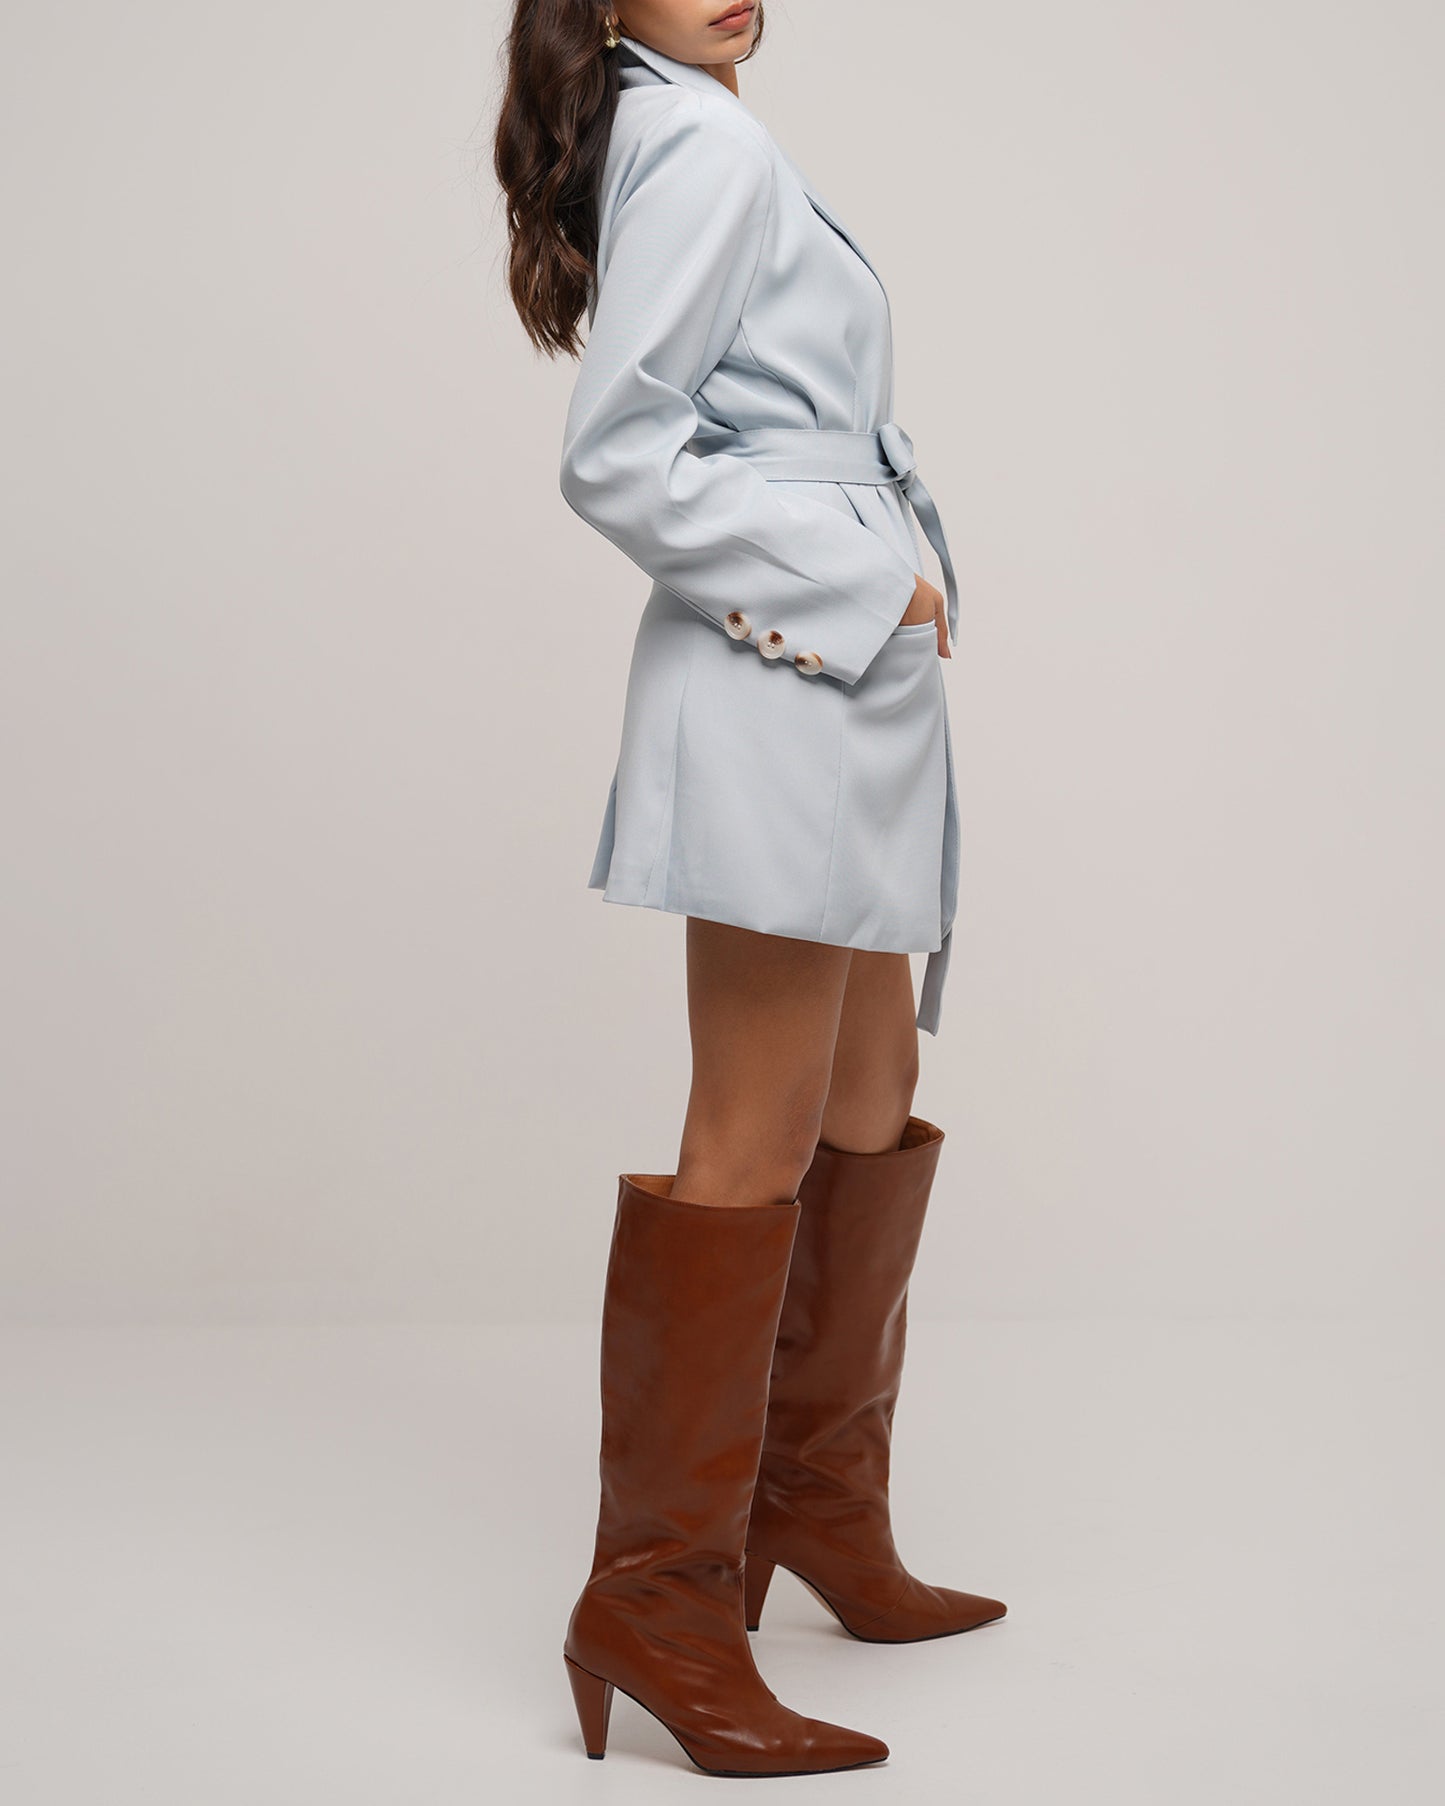 Country air oversized fit blazer with defined shoulders